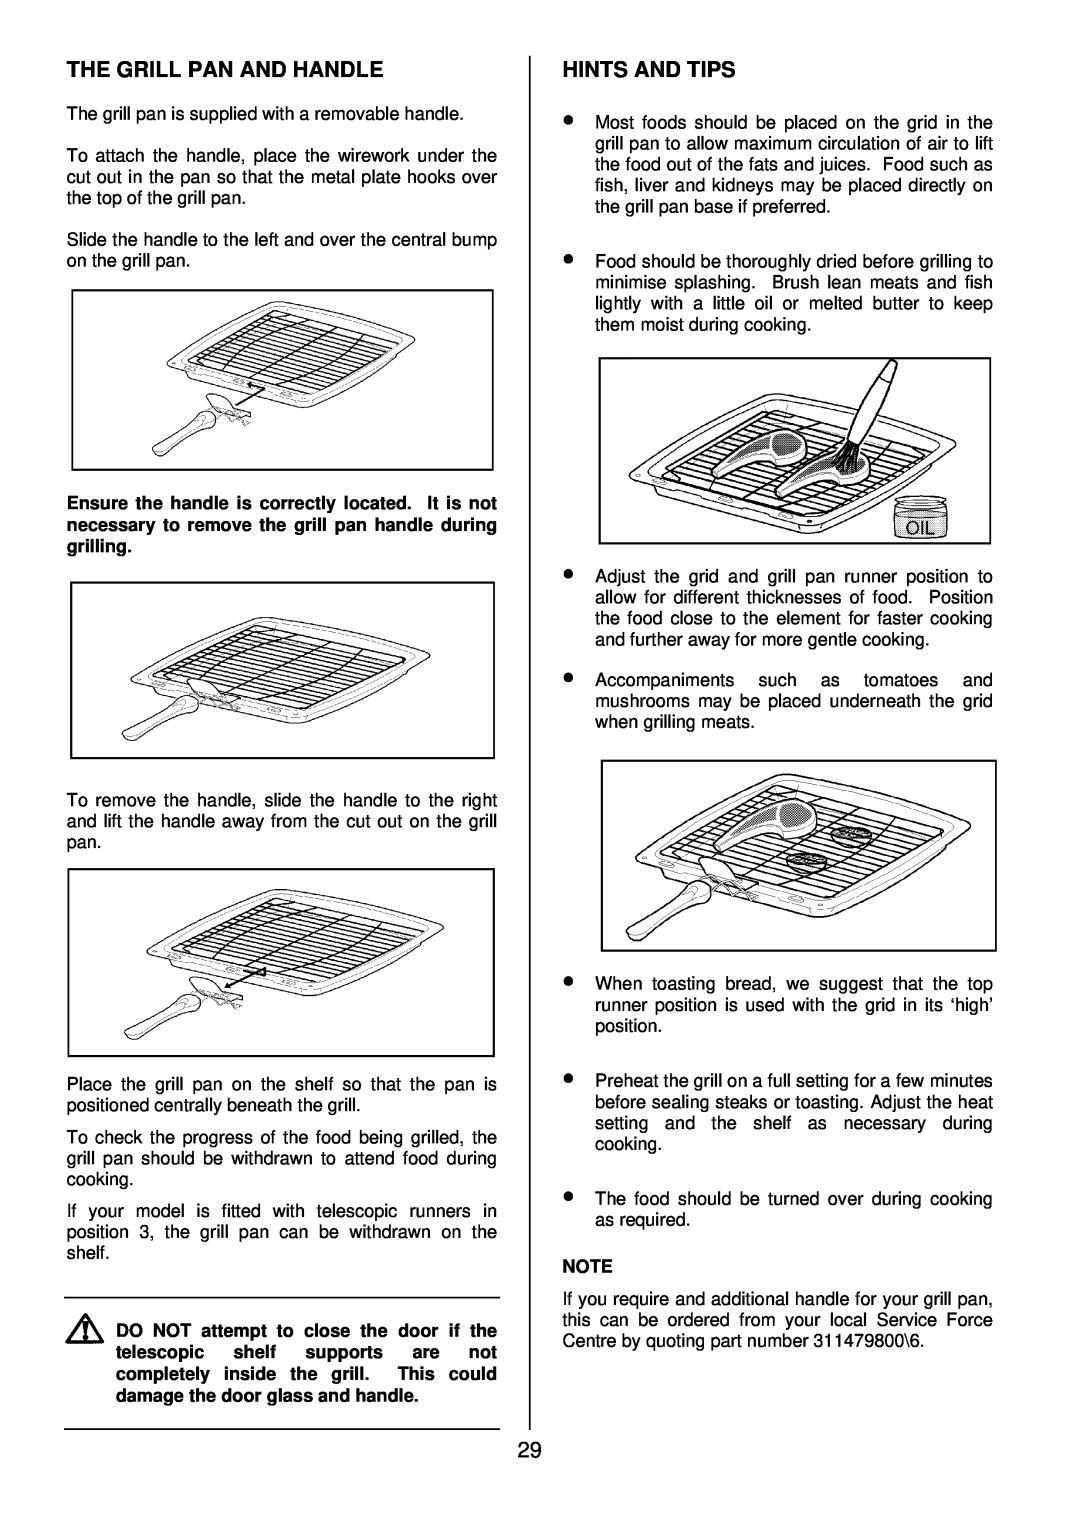 Zanussi ZDQ 895 manual The Grill Pan And Handle, Hints And Tips, The grill pan is supplied with a removable handle 